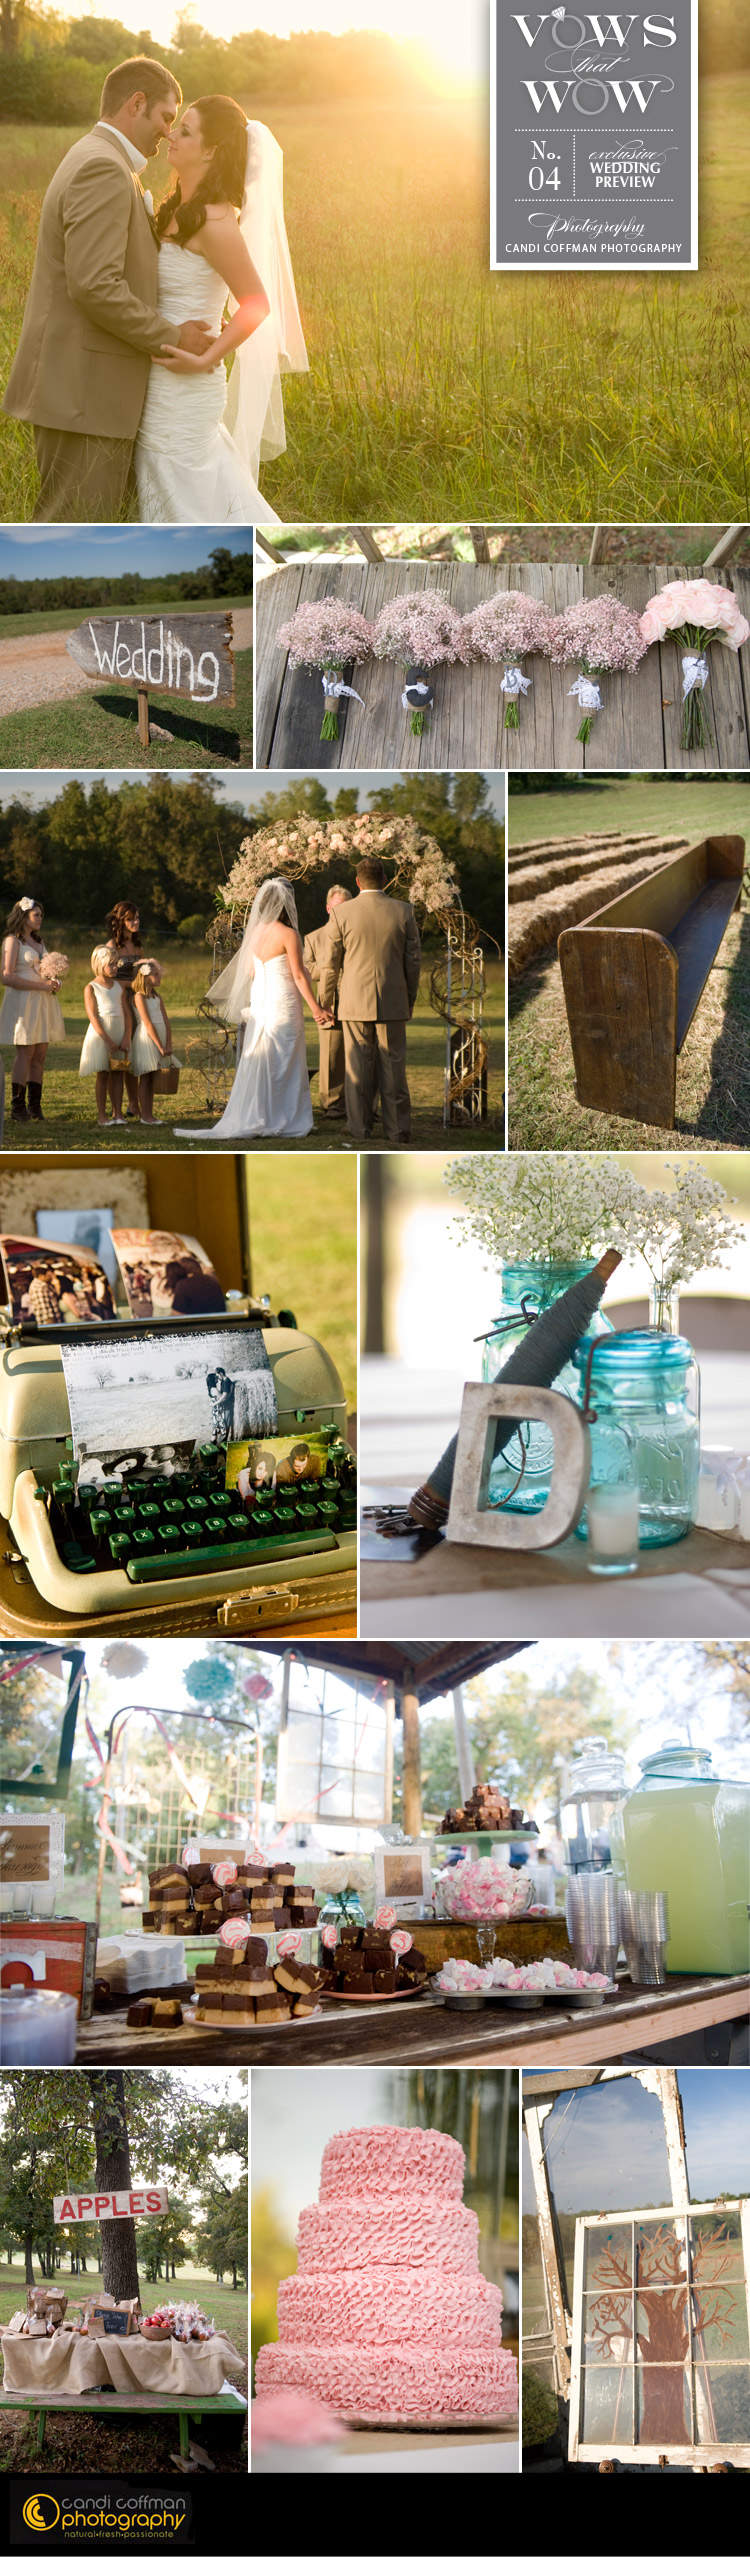 Brides of Oklahoma vows that wow featuring Oklahoma wedding photographer Candi Coffman Photography